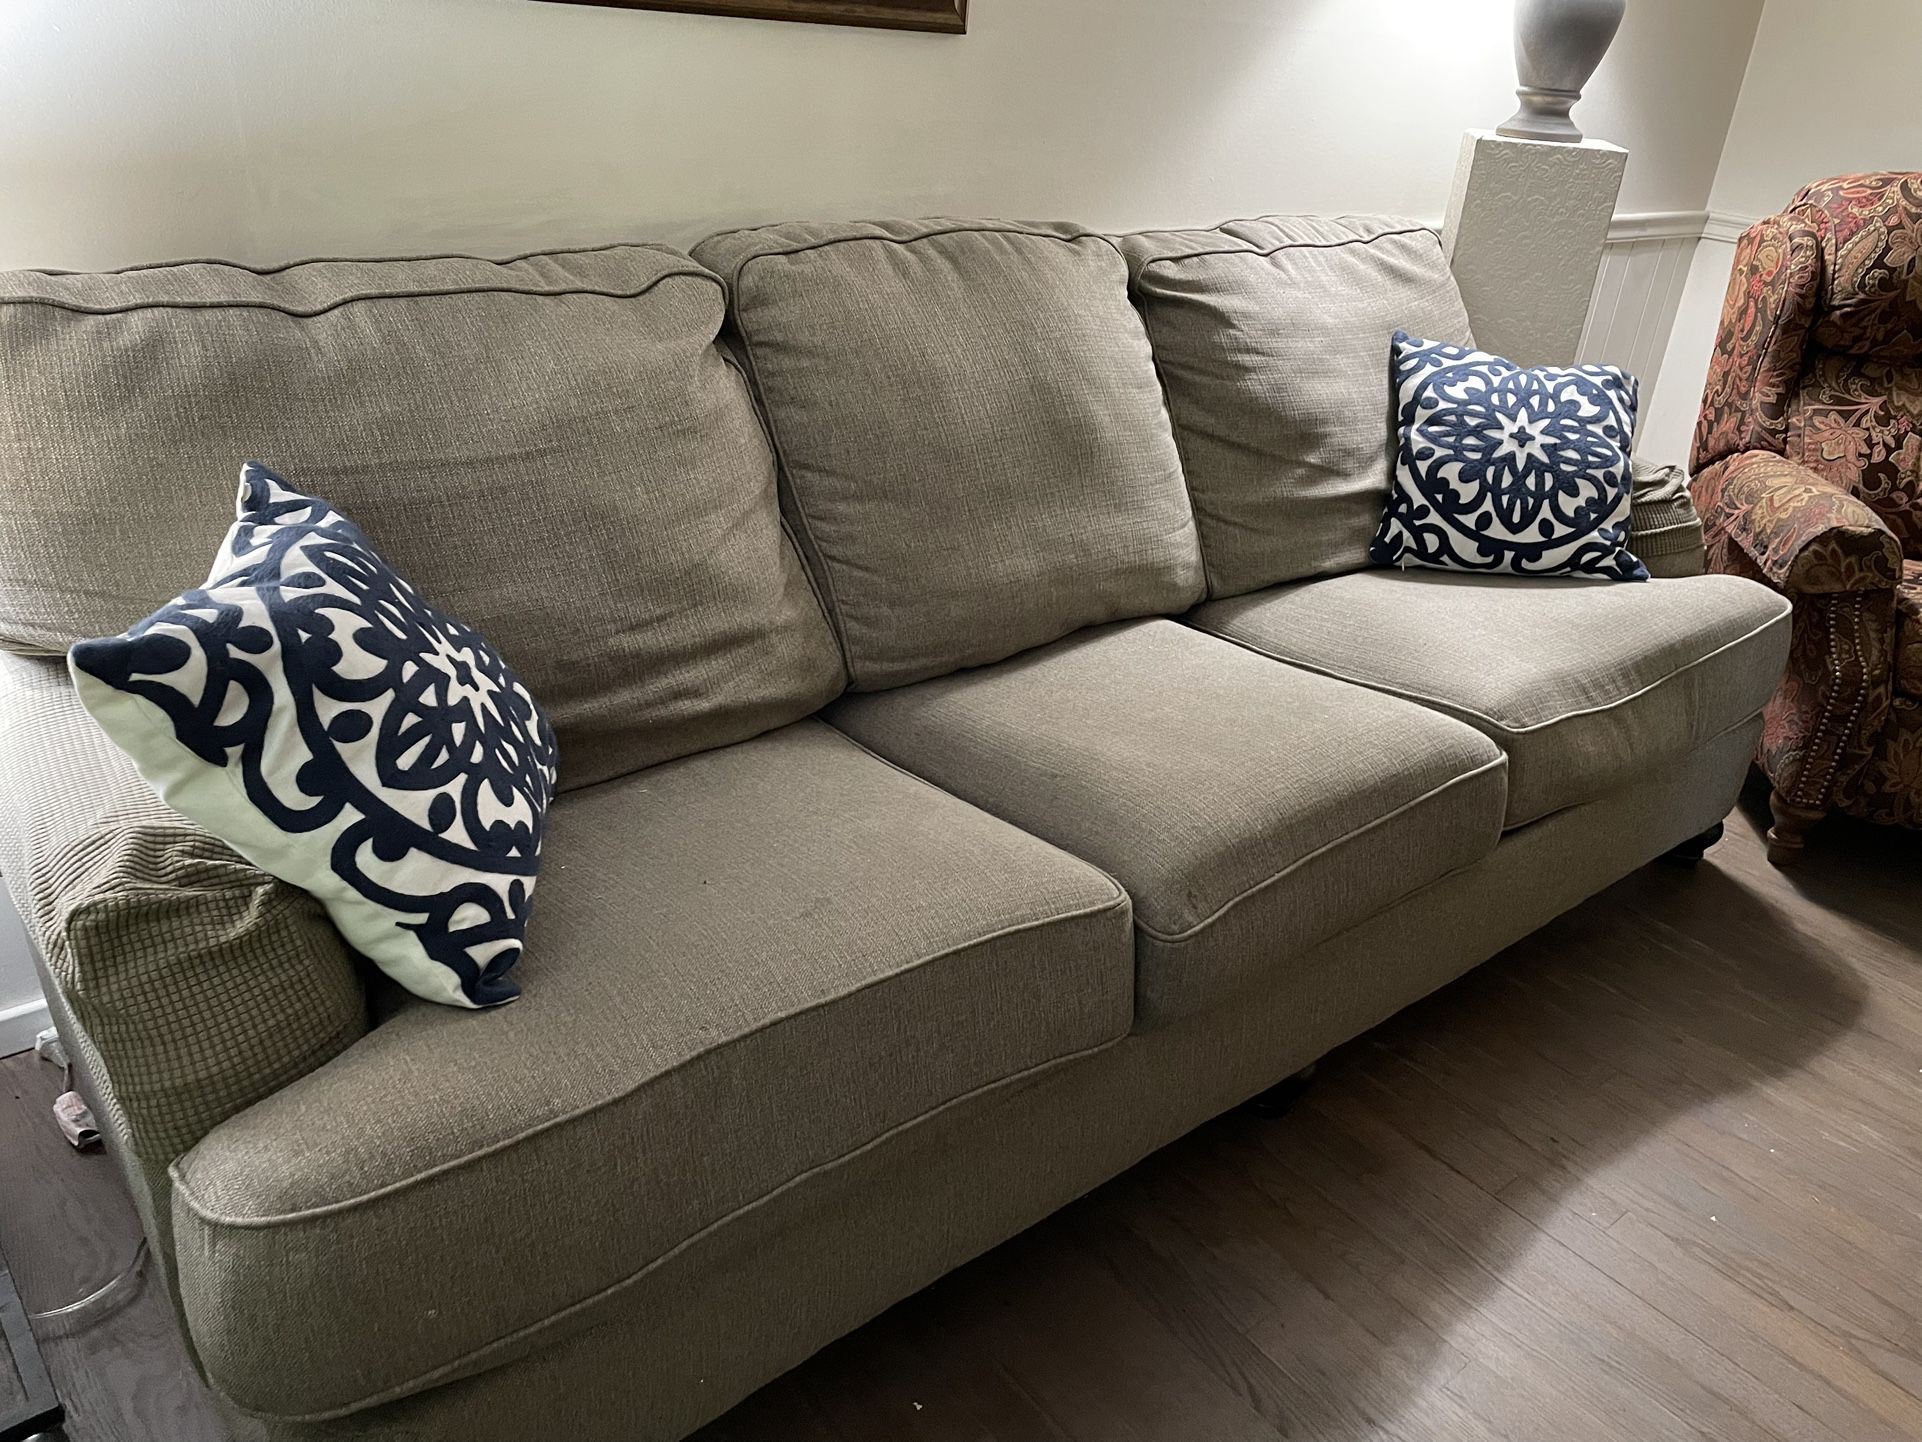 Neutral Couch - Blends with brown or gray